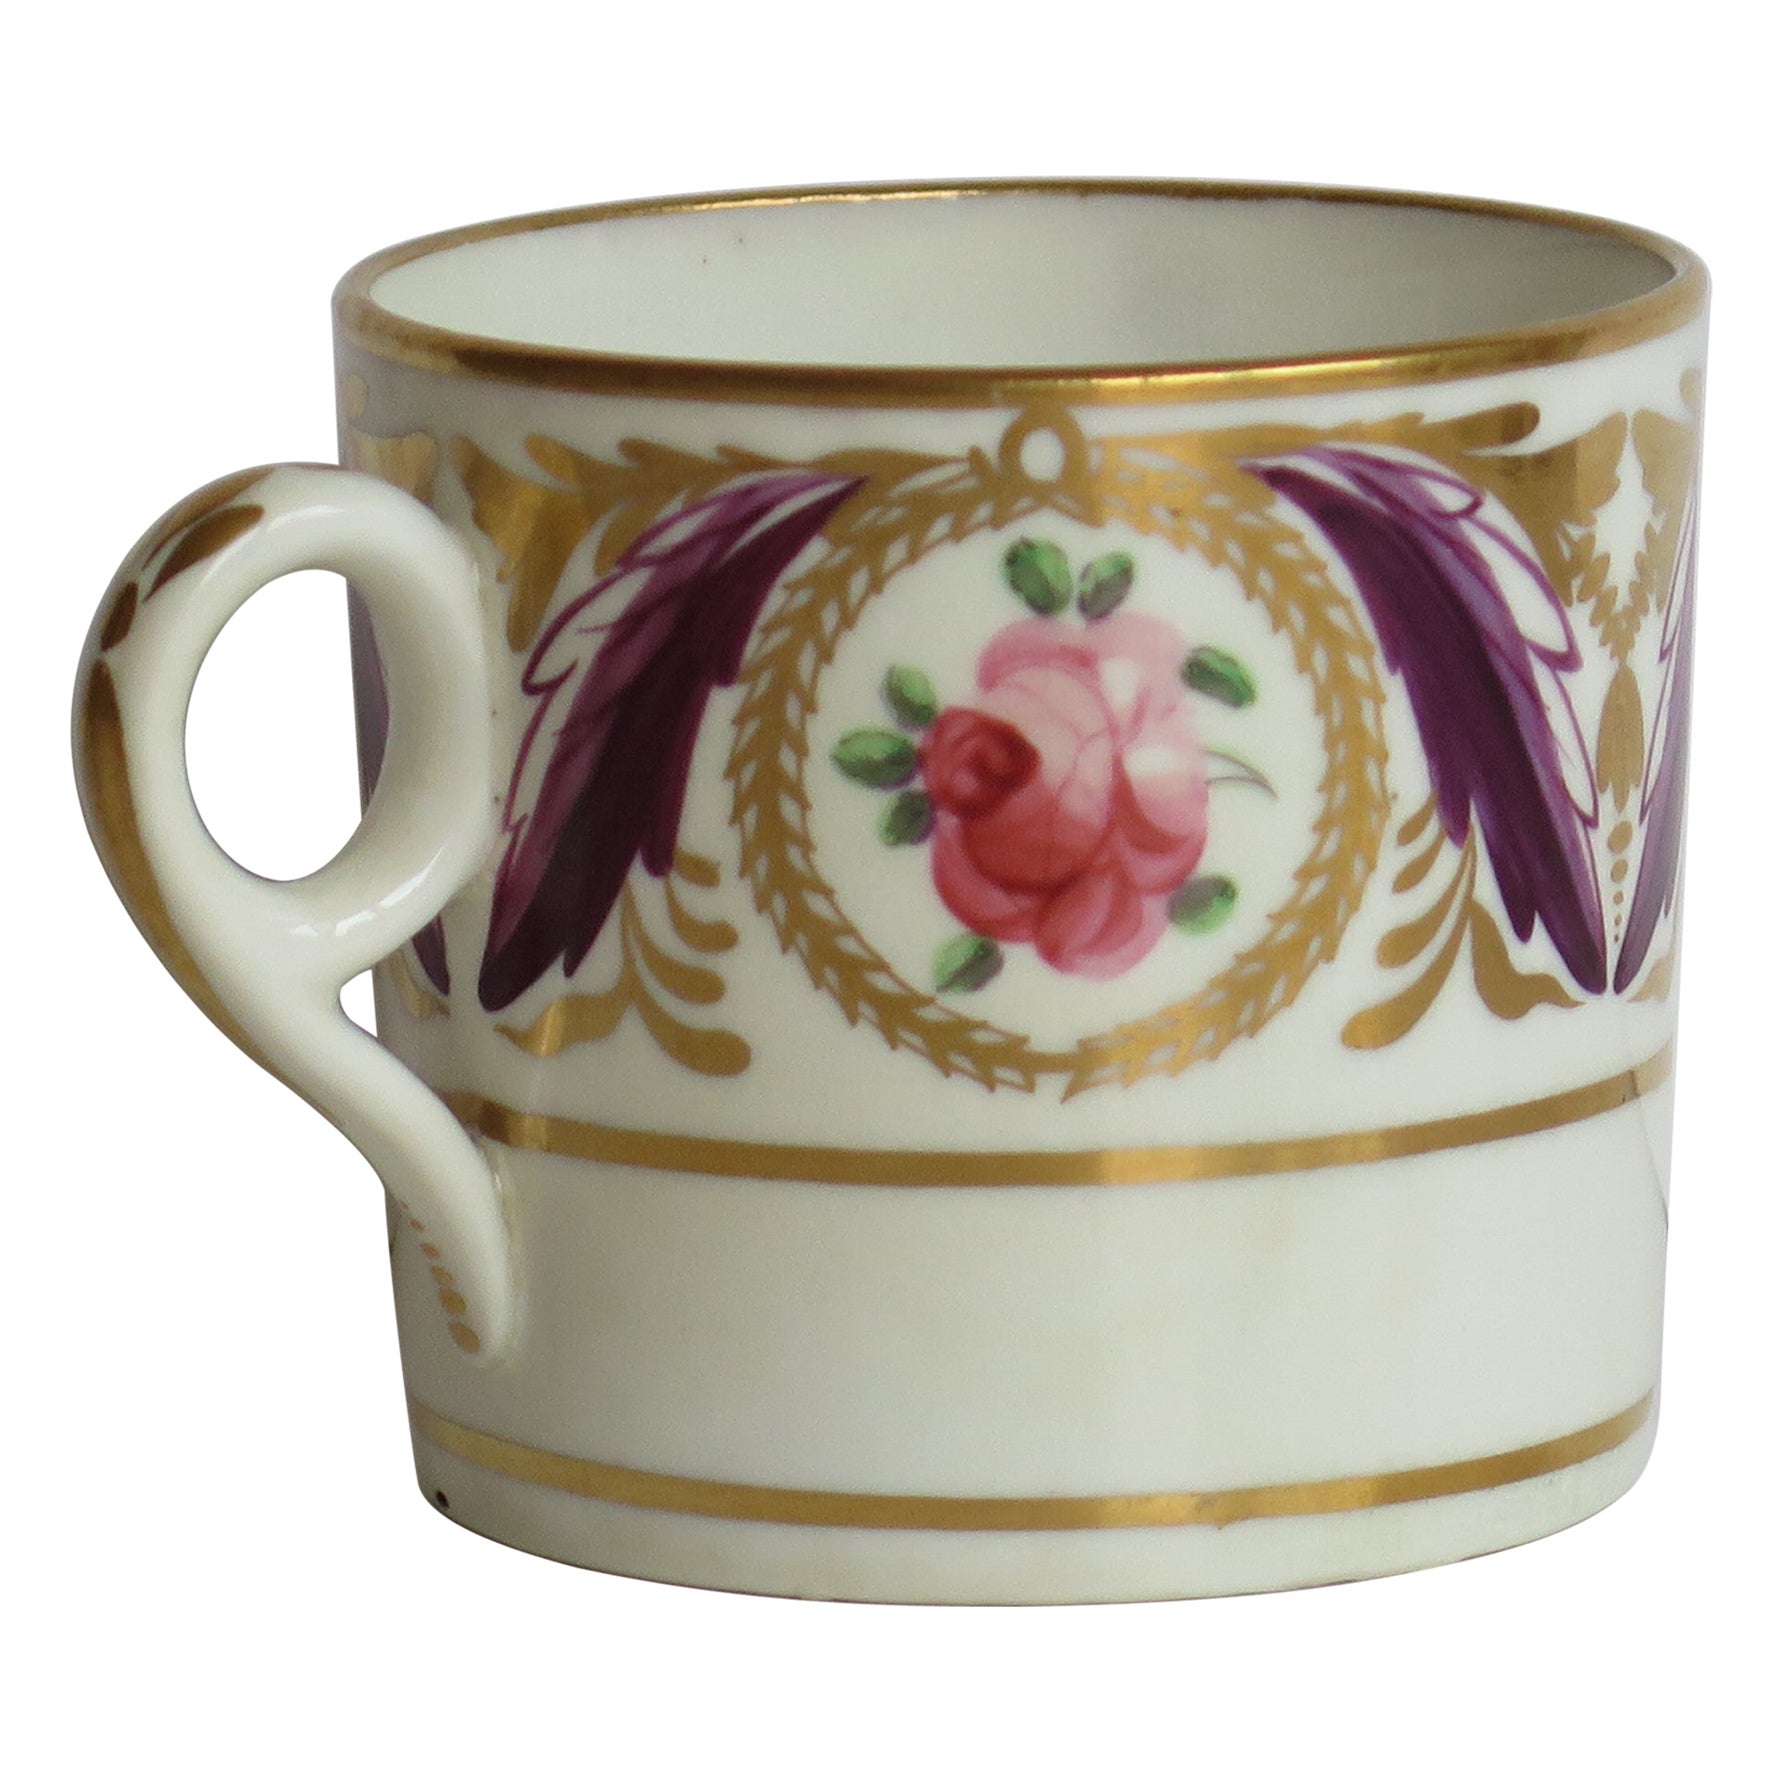 George 111 Minton Porcelain Coffee Can Hand Painted in Pattern 791, Ca 1805